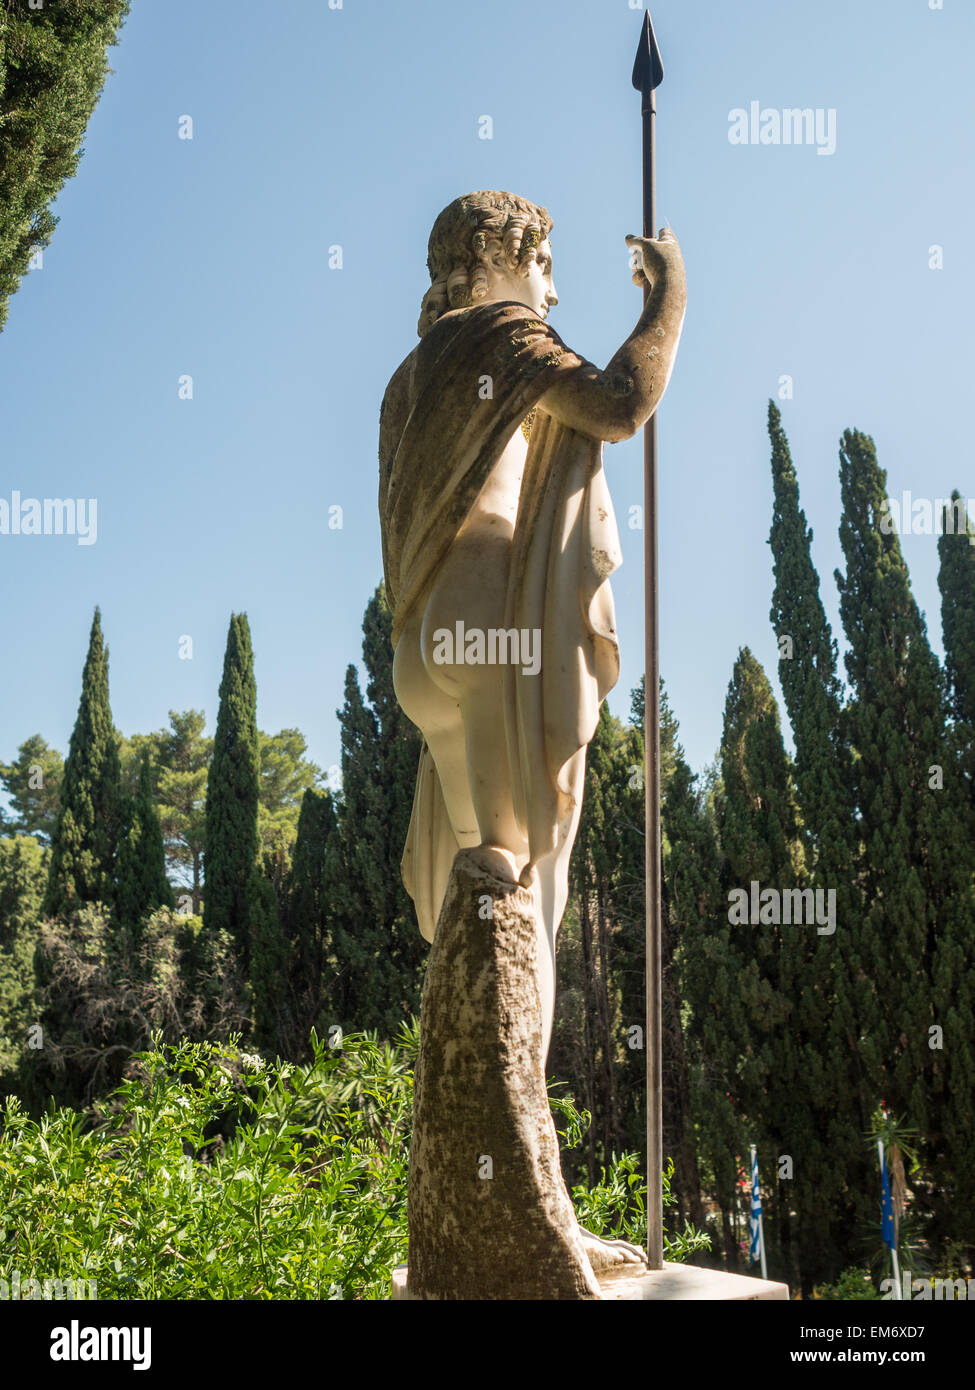 Classical statue and cypresses trees in Achillion Palace garden Stock Photo